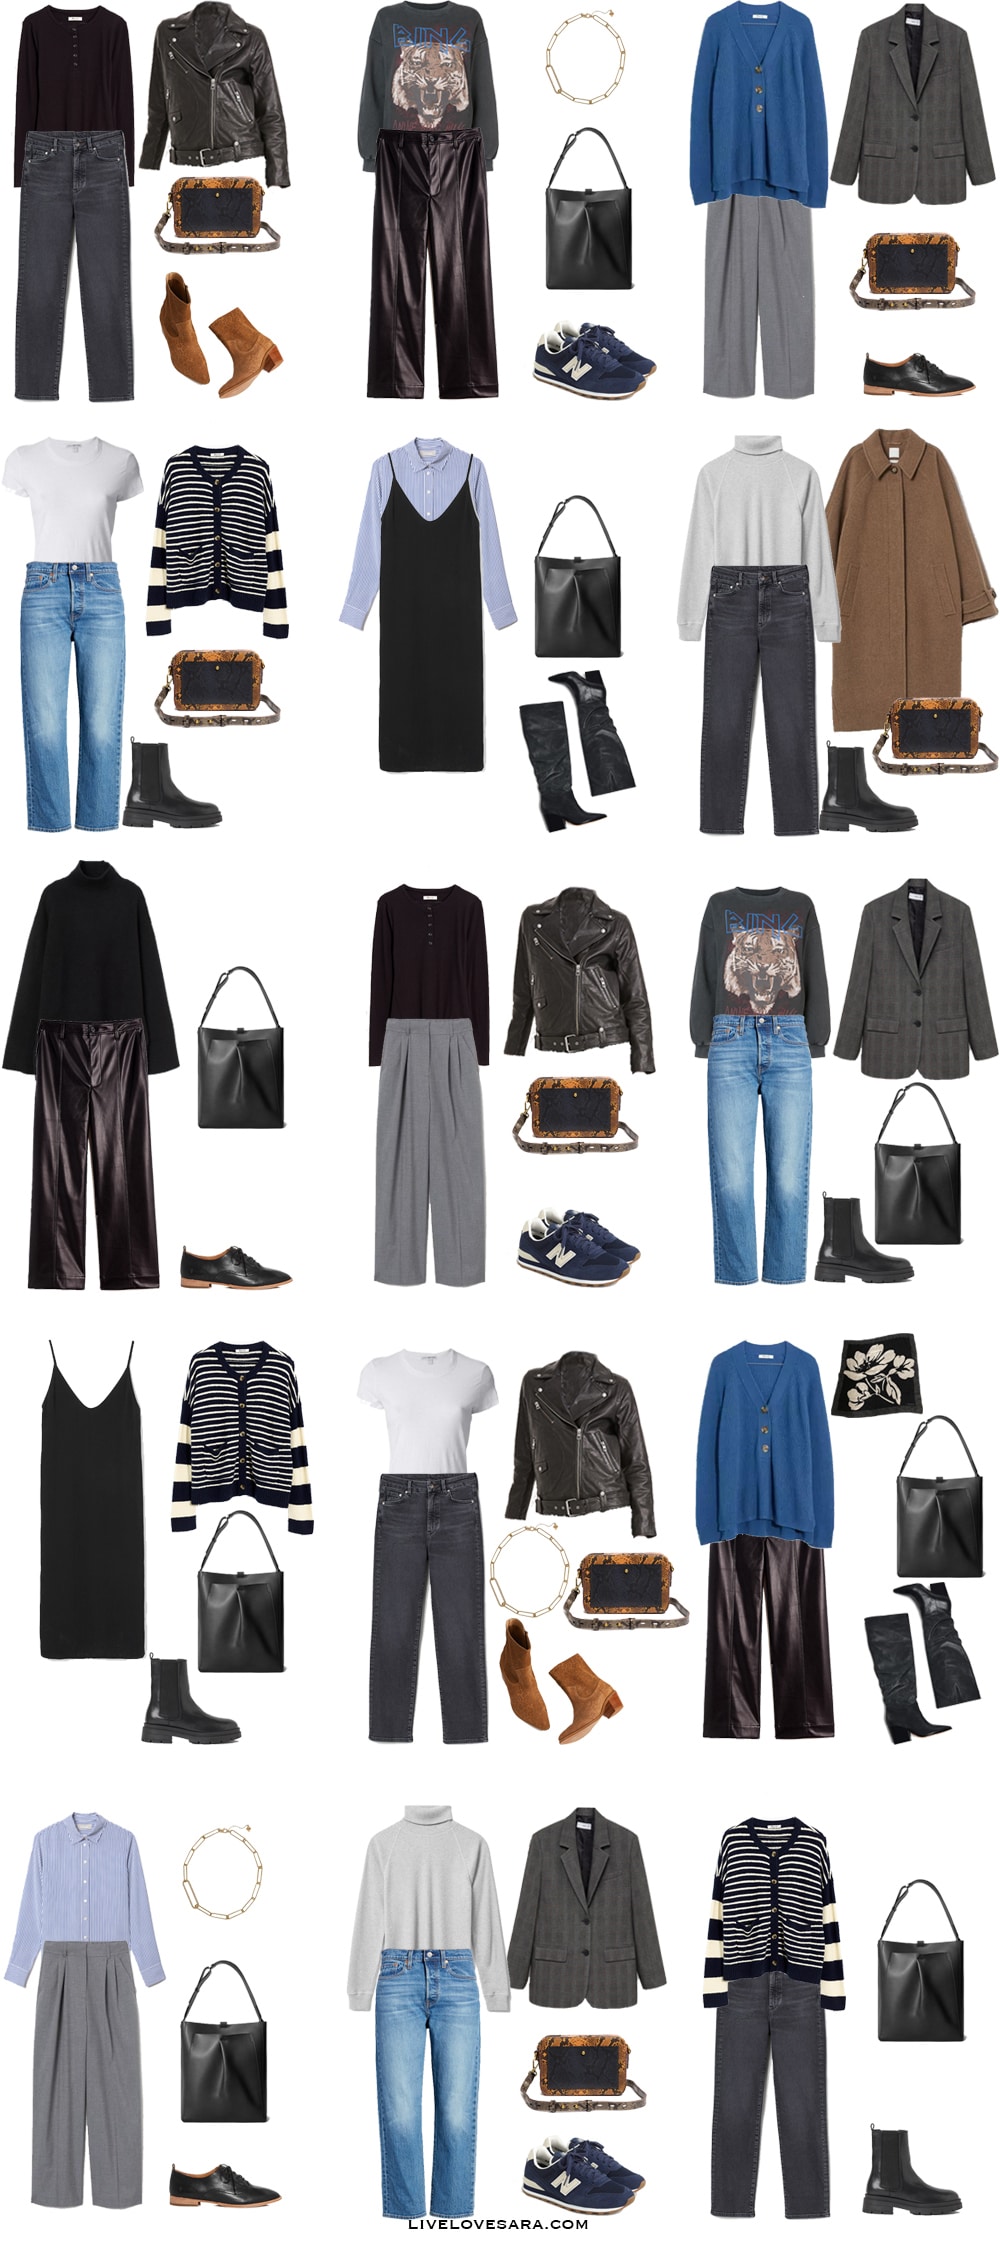 A Rock Chic Inspired Fall Capsule Wardrobe Outfits 1-15